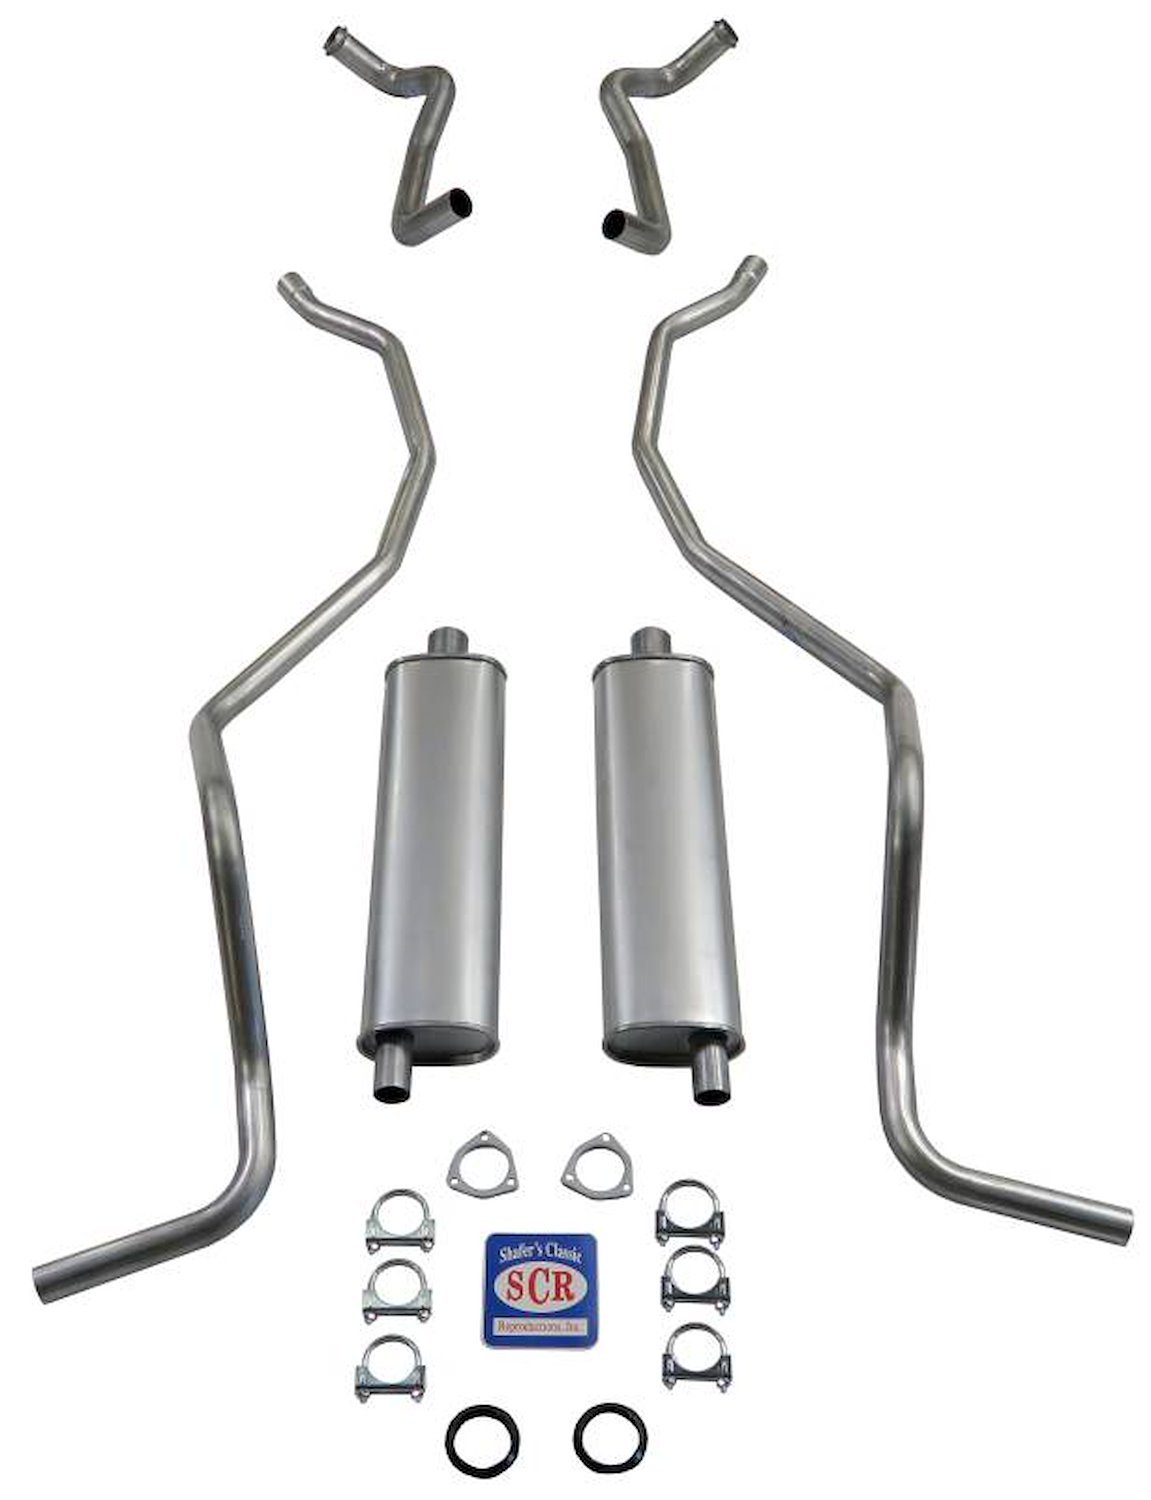 73036S 1962-1964 Chevrolet SW 327 w/ 2-1/2 in. Exhaust Hi-Performance Exhaust System, 304 Stainless Steel